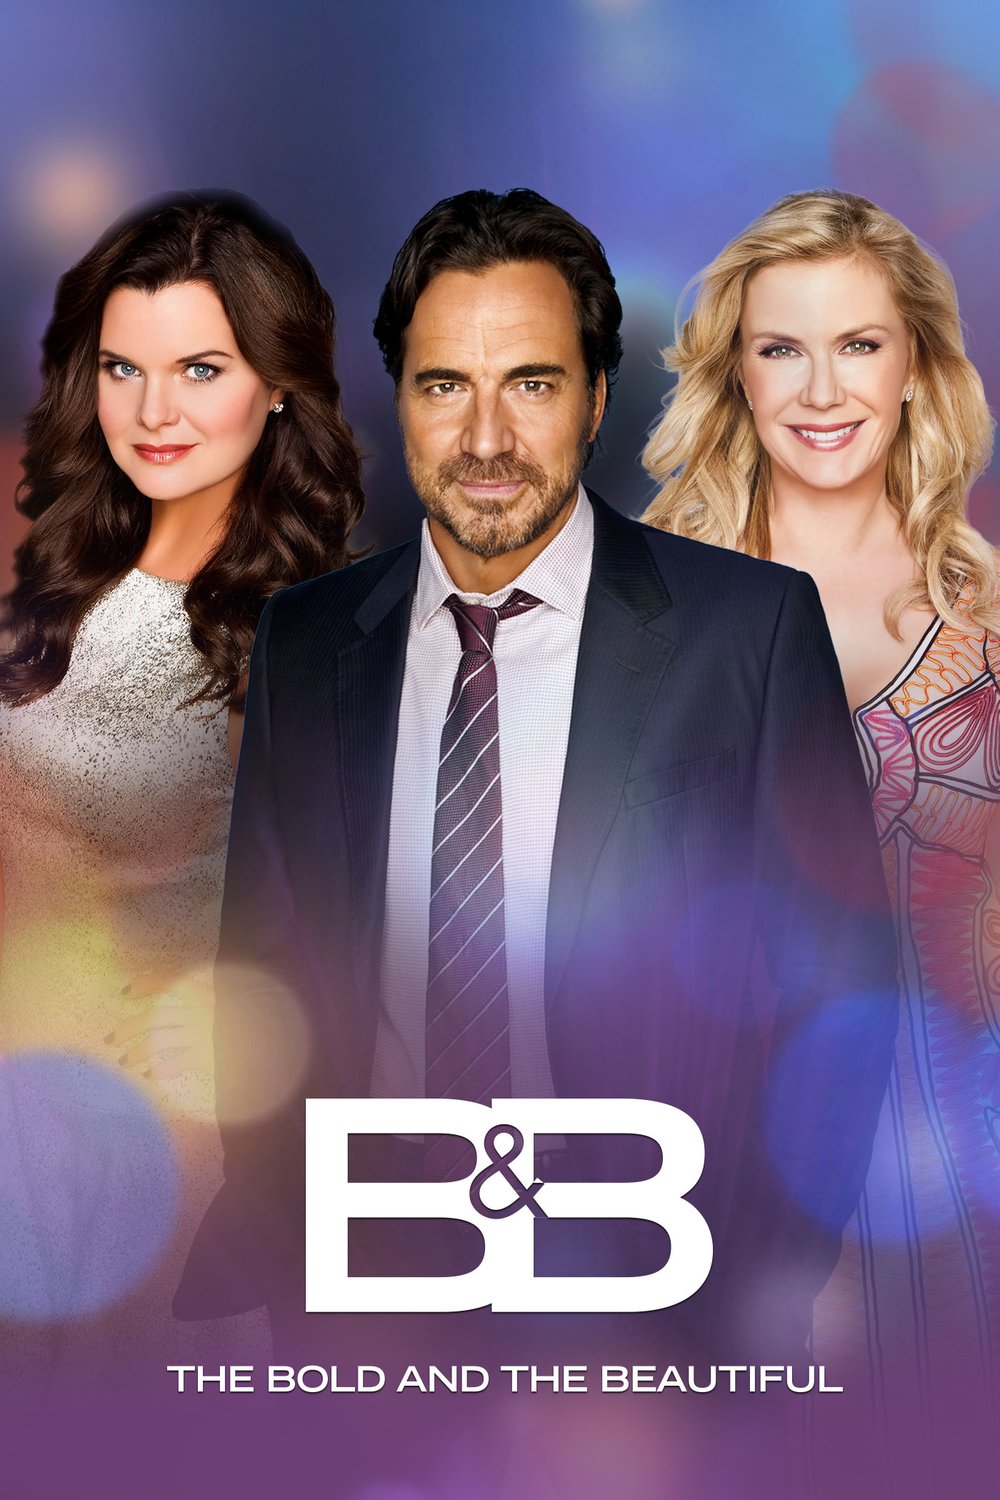 L'affiche du film The Bold and the Beautiful